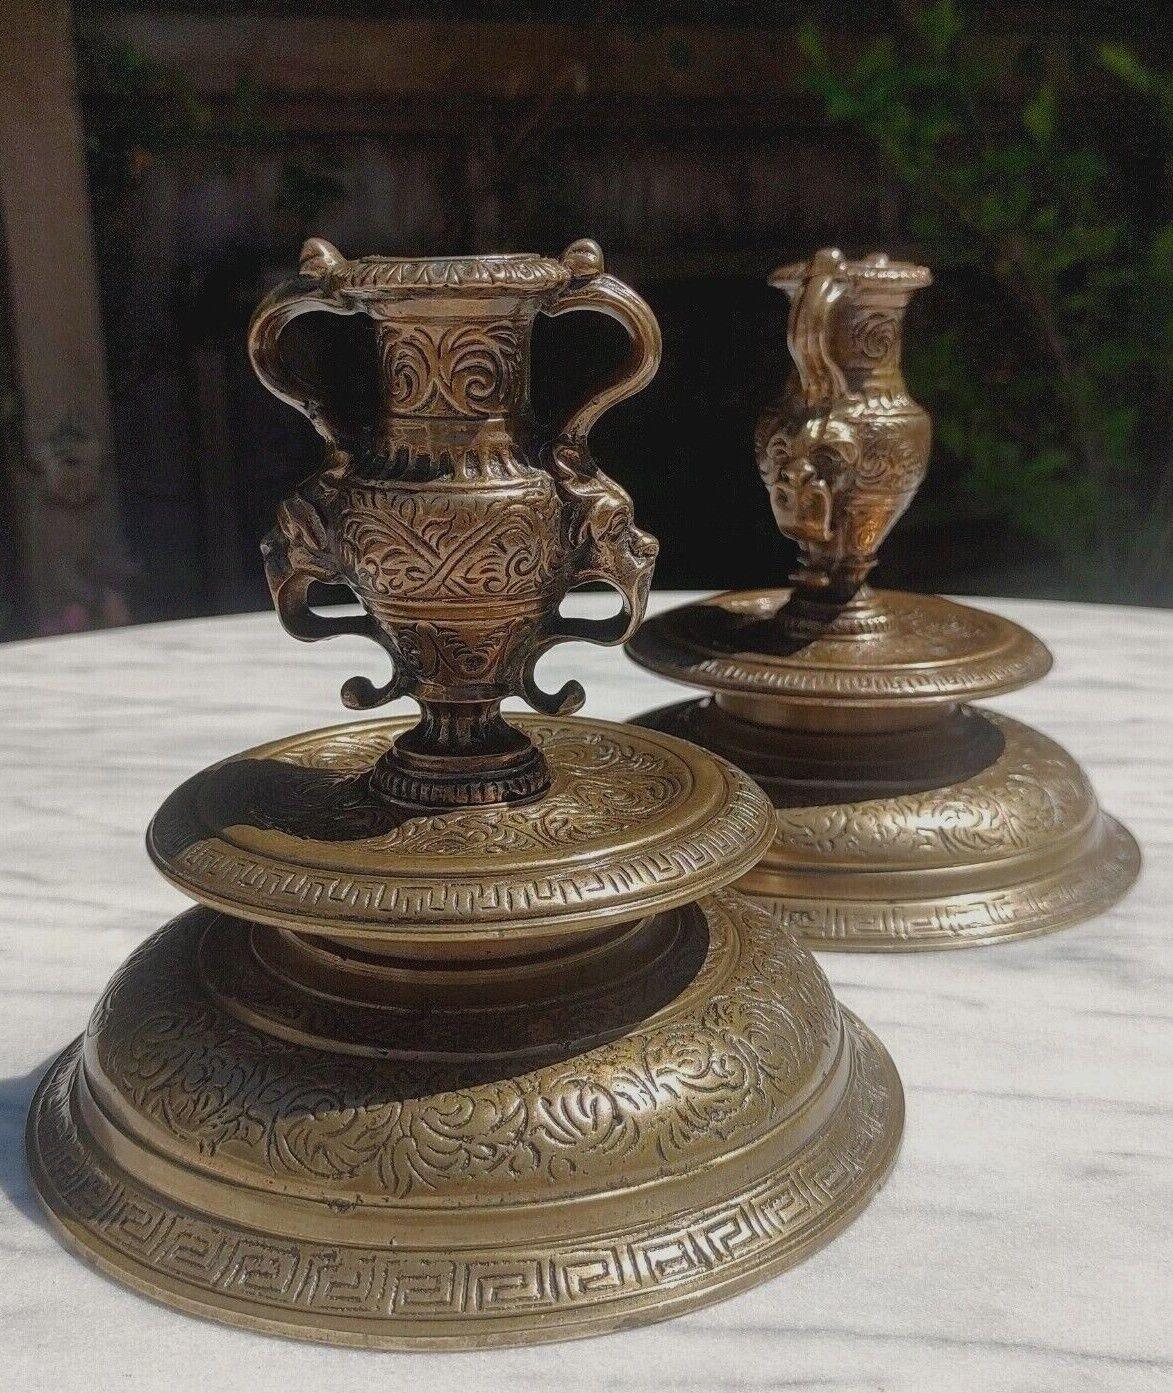 Pair of French Neoclassical Renaissance Style 19th Century Bronze Urn Candlestick Holders - Tommy's Treasure